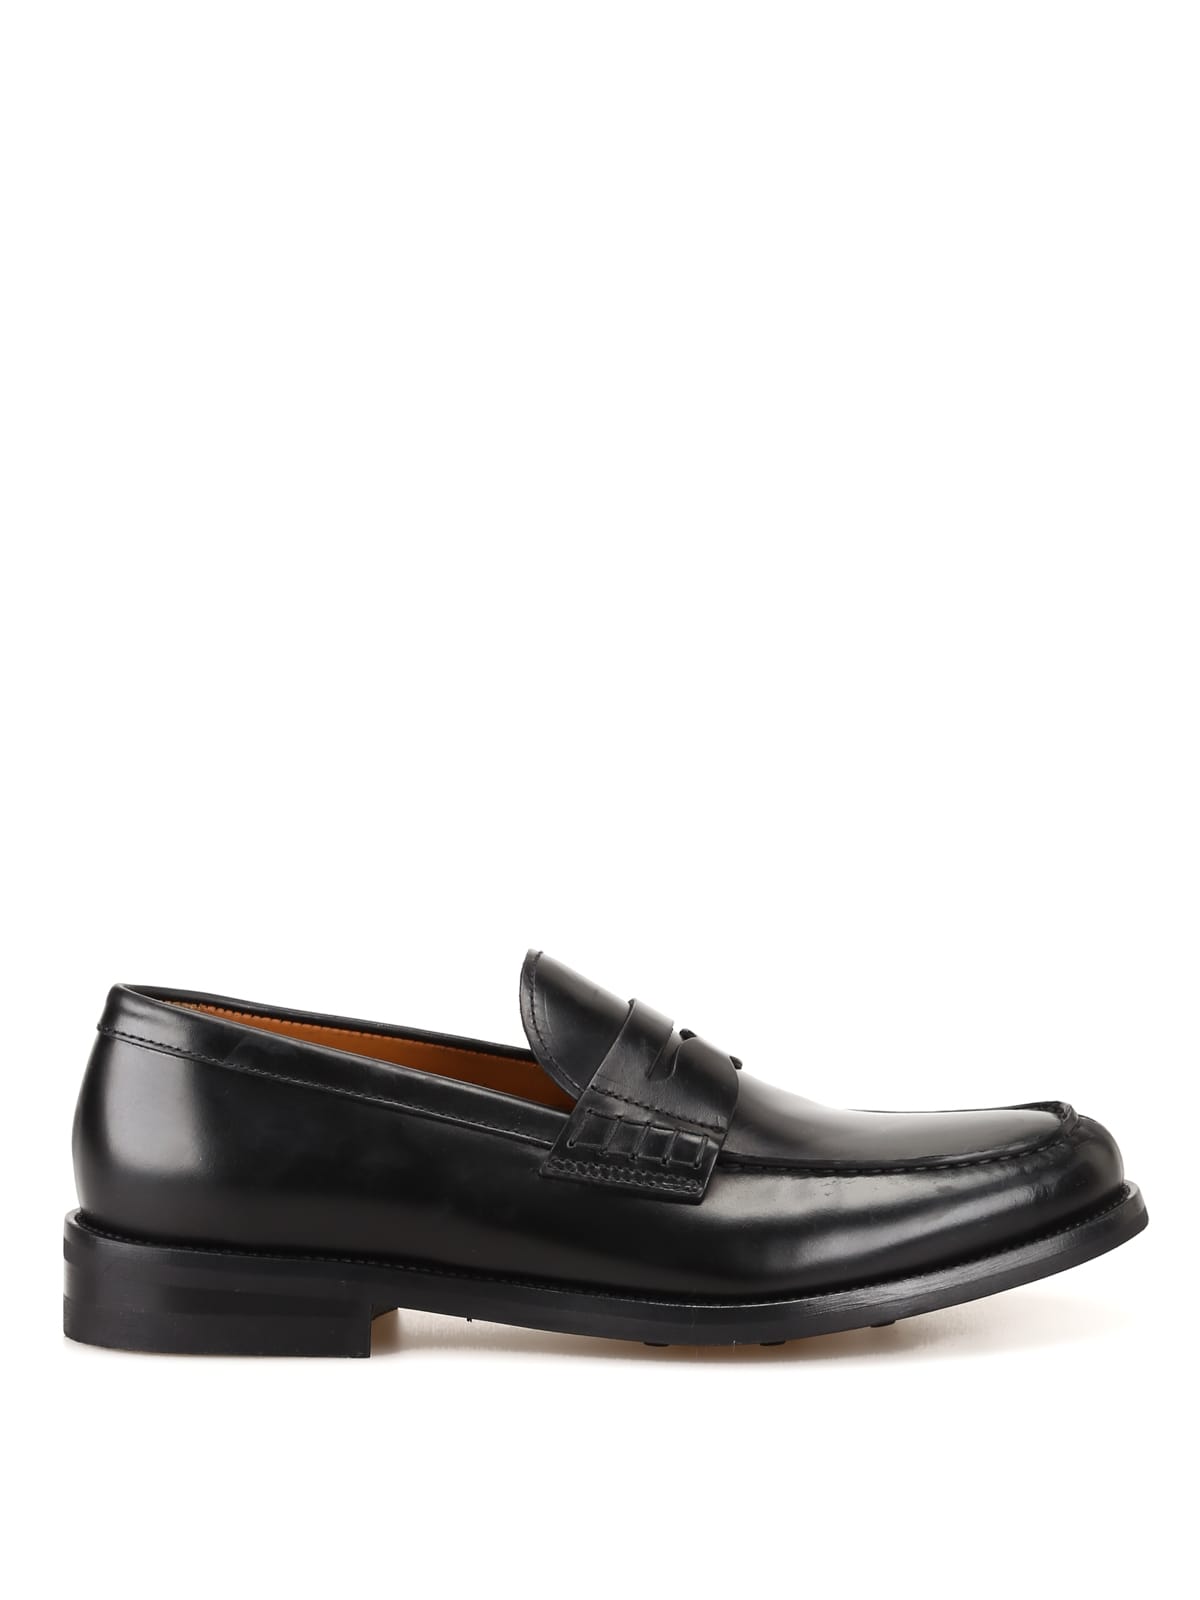 Doucals Penny Loafer Horse | Smart Closet